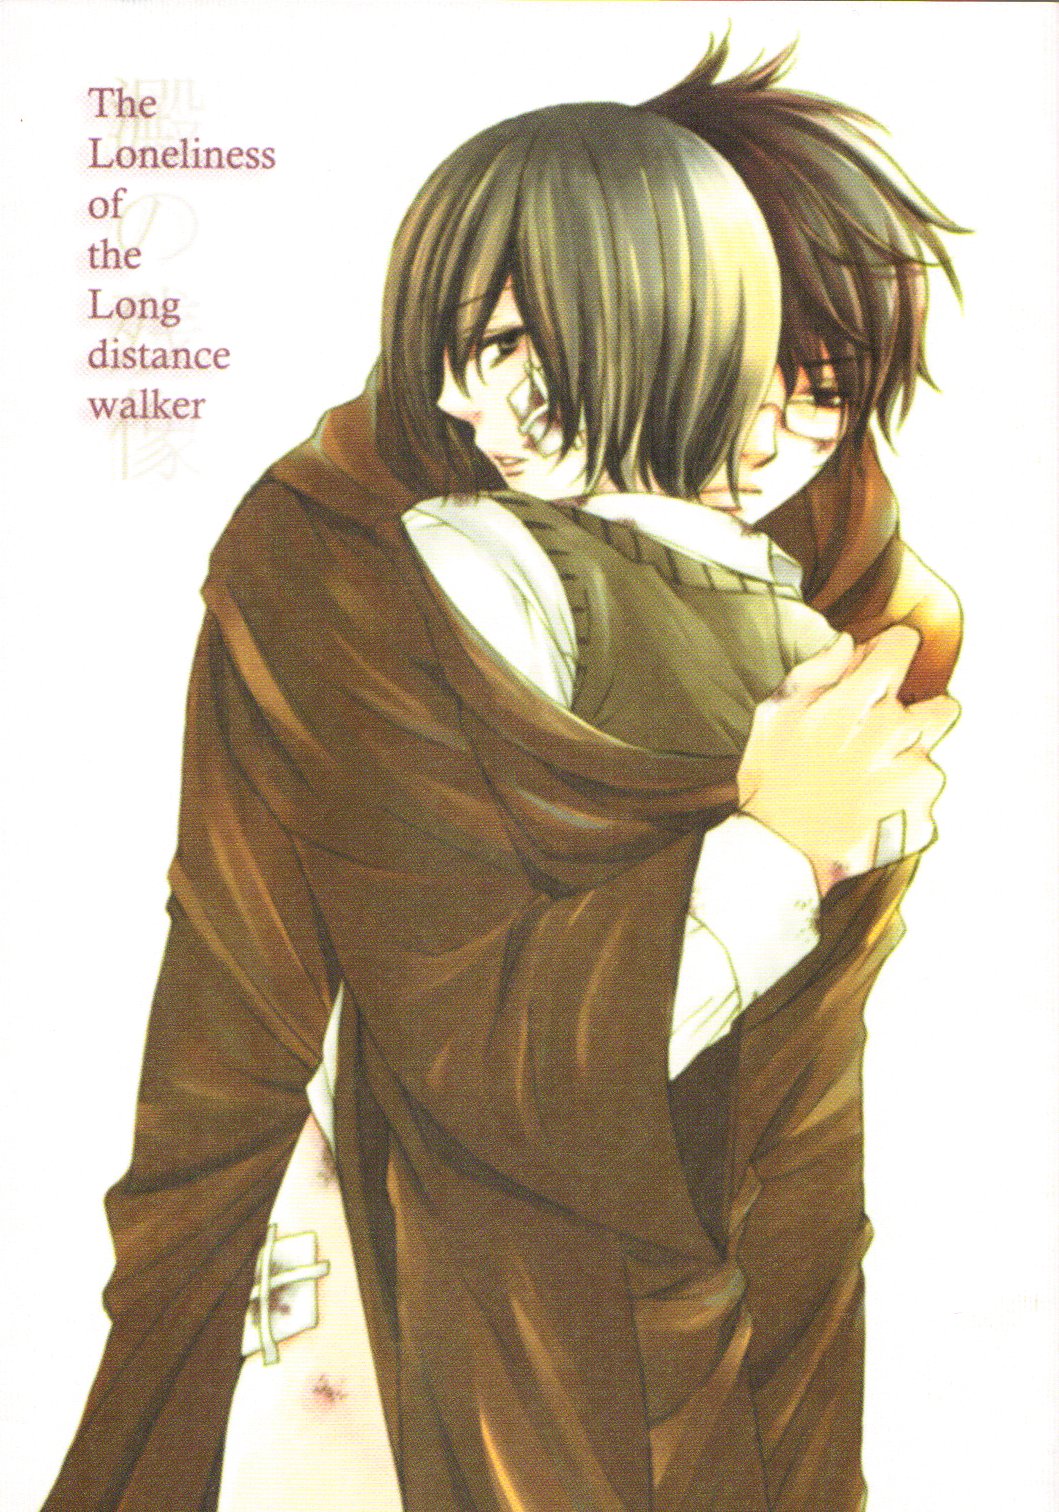 Harry Potter dj The World (Doujinshi) Vol. 1 Ch. 9 The Loneliness of the Long Distance Walker